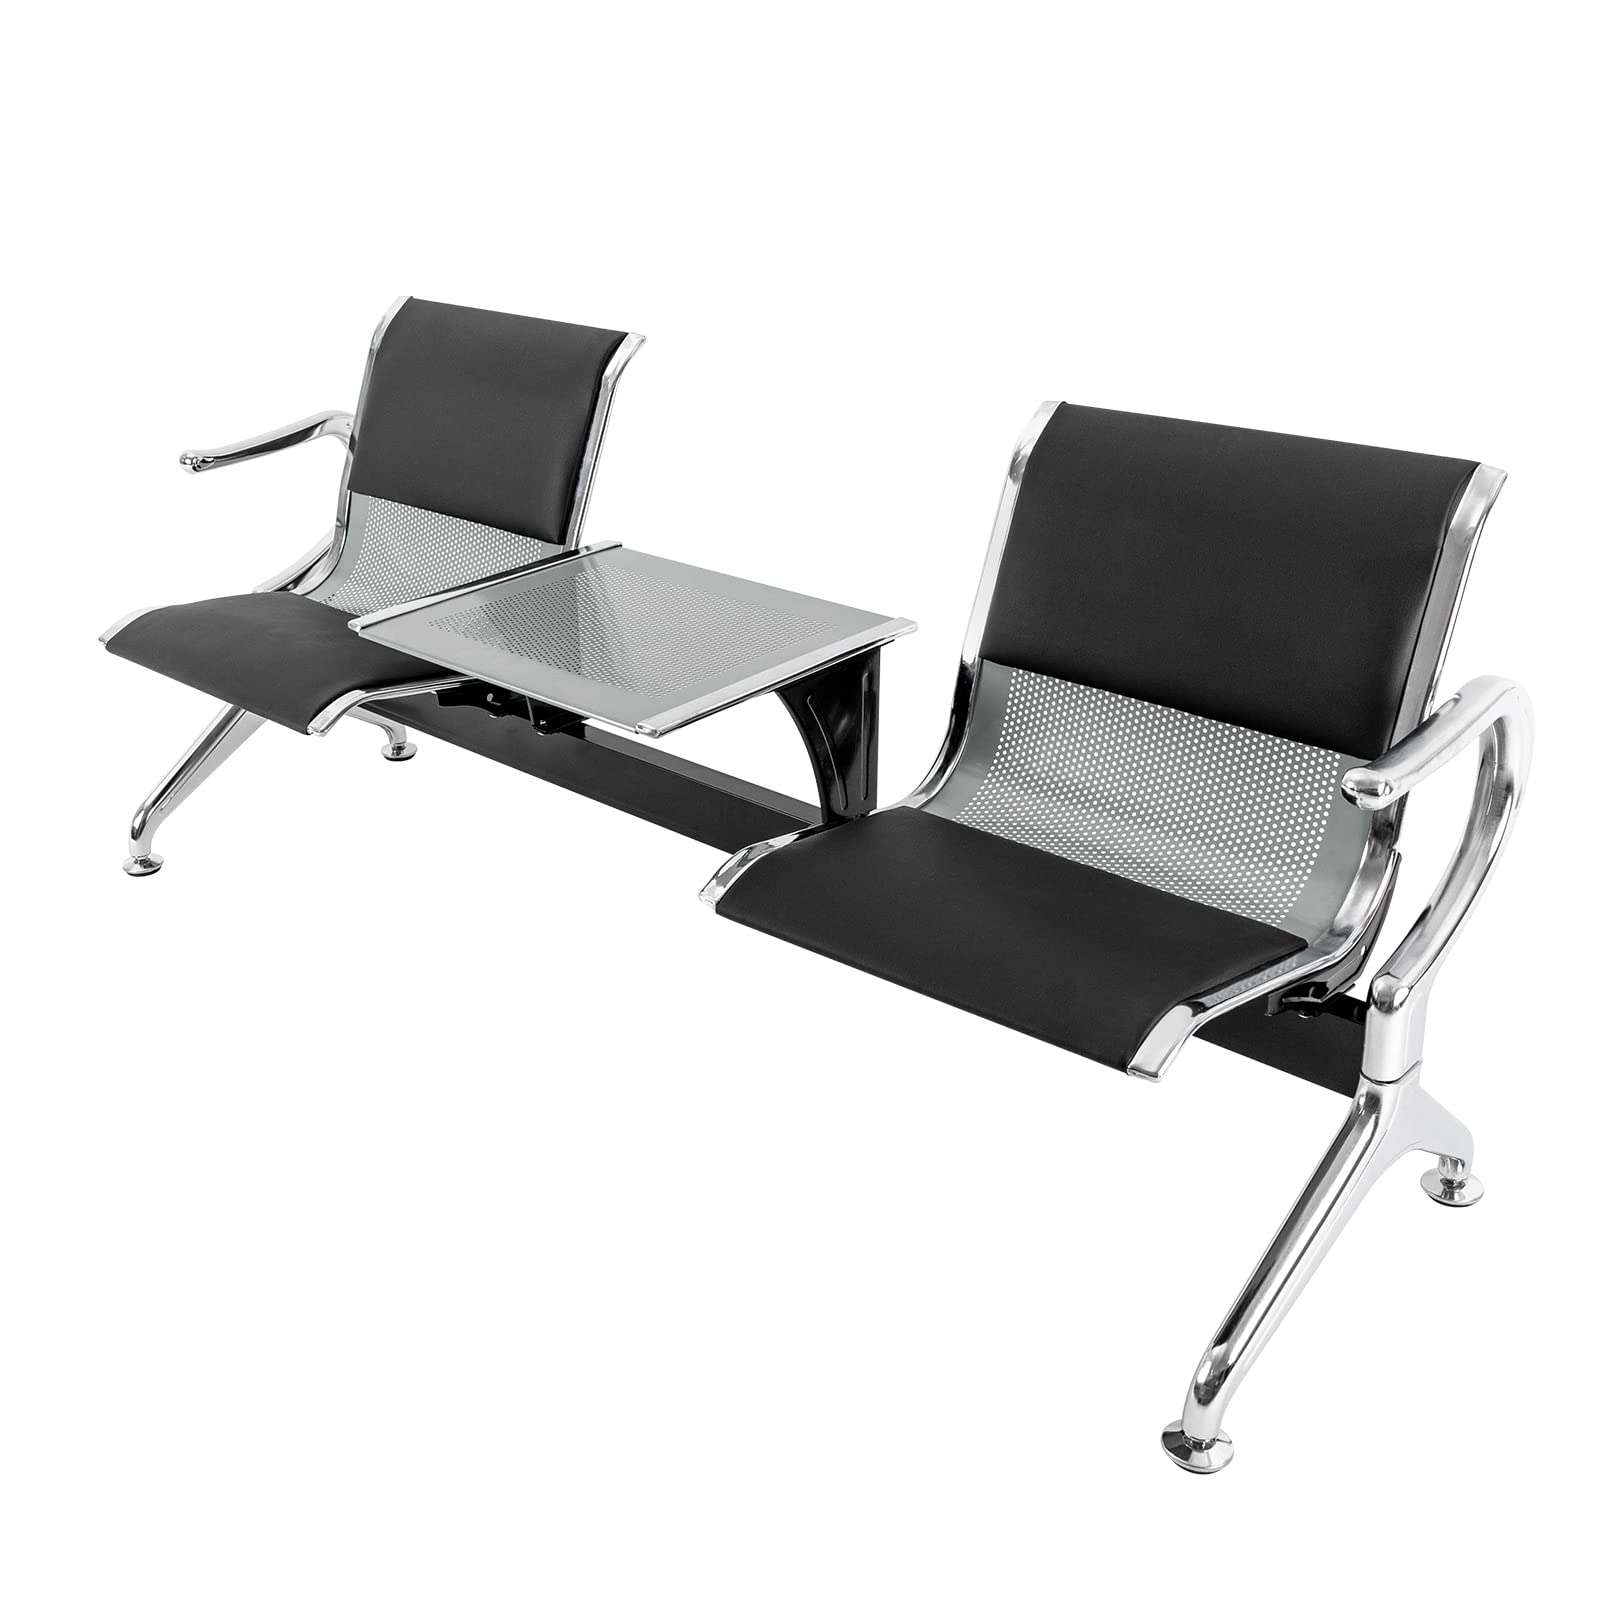 Airport Reception Chairs Waiting Room Chairs with Table and Arms 2 Seat PU Leather Reception Bench Waiting Area Bench Guest Reception Chairs for Office, Business, Salon, Bank, Hospital, School